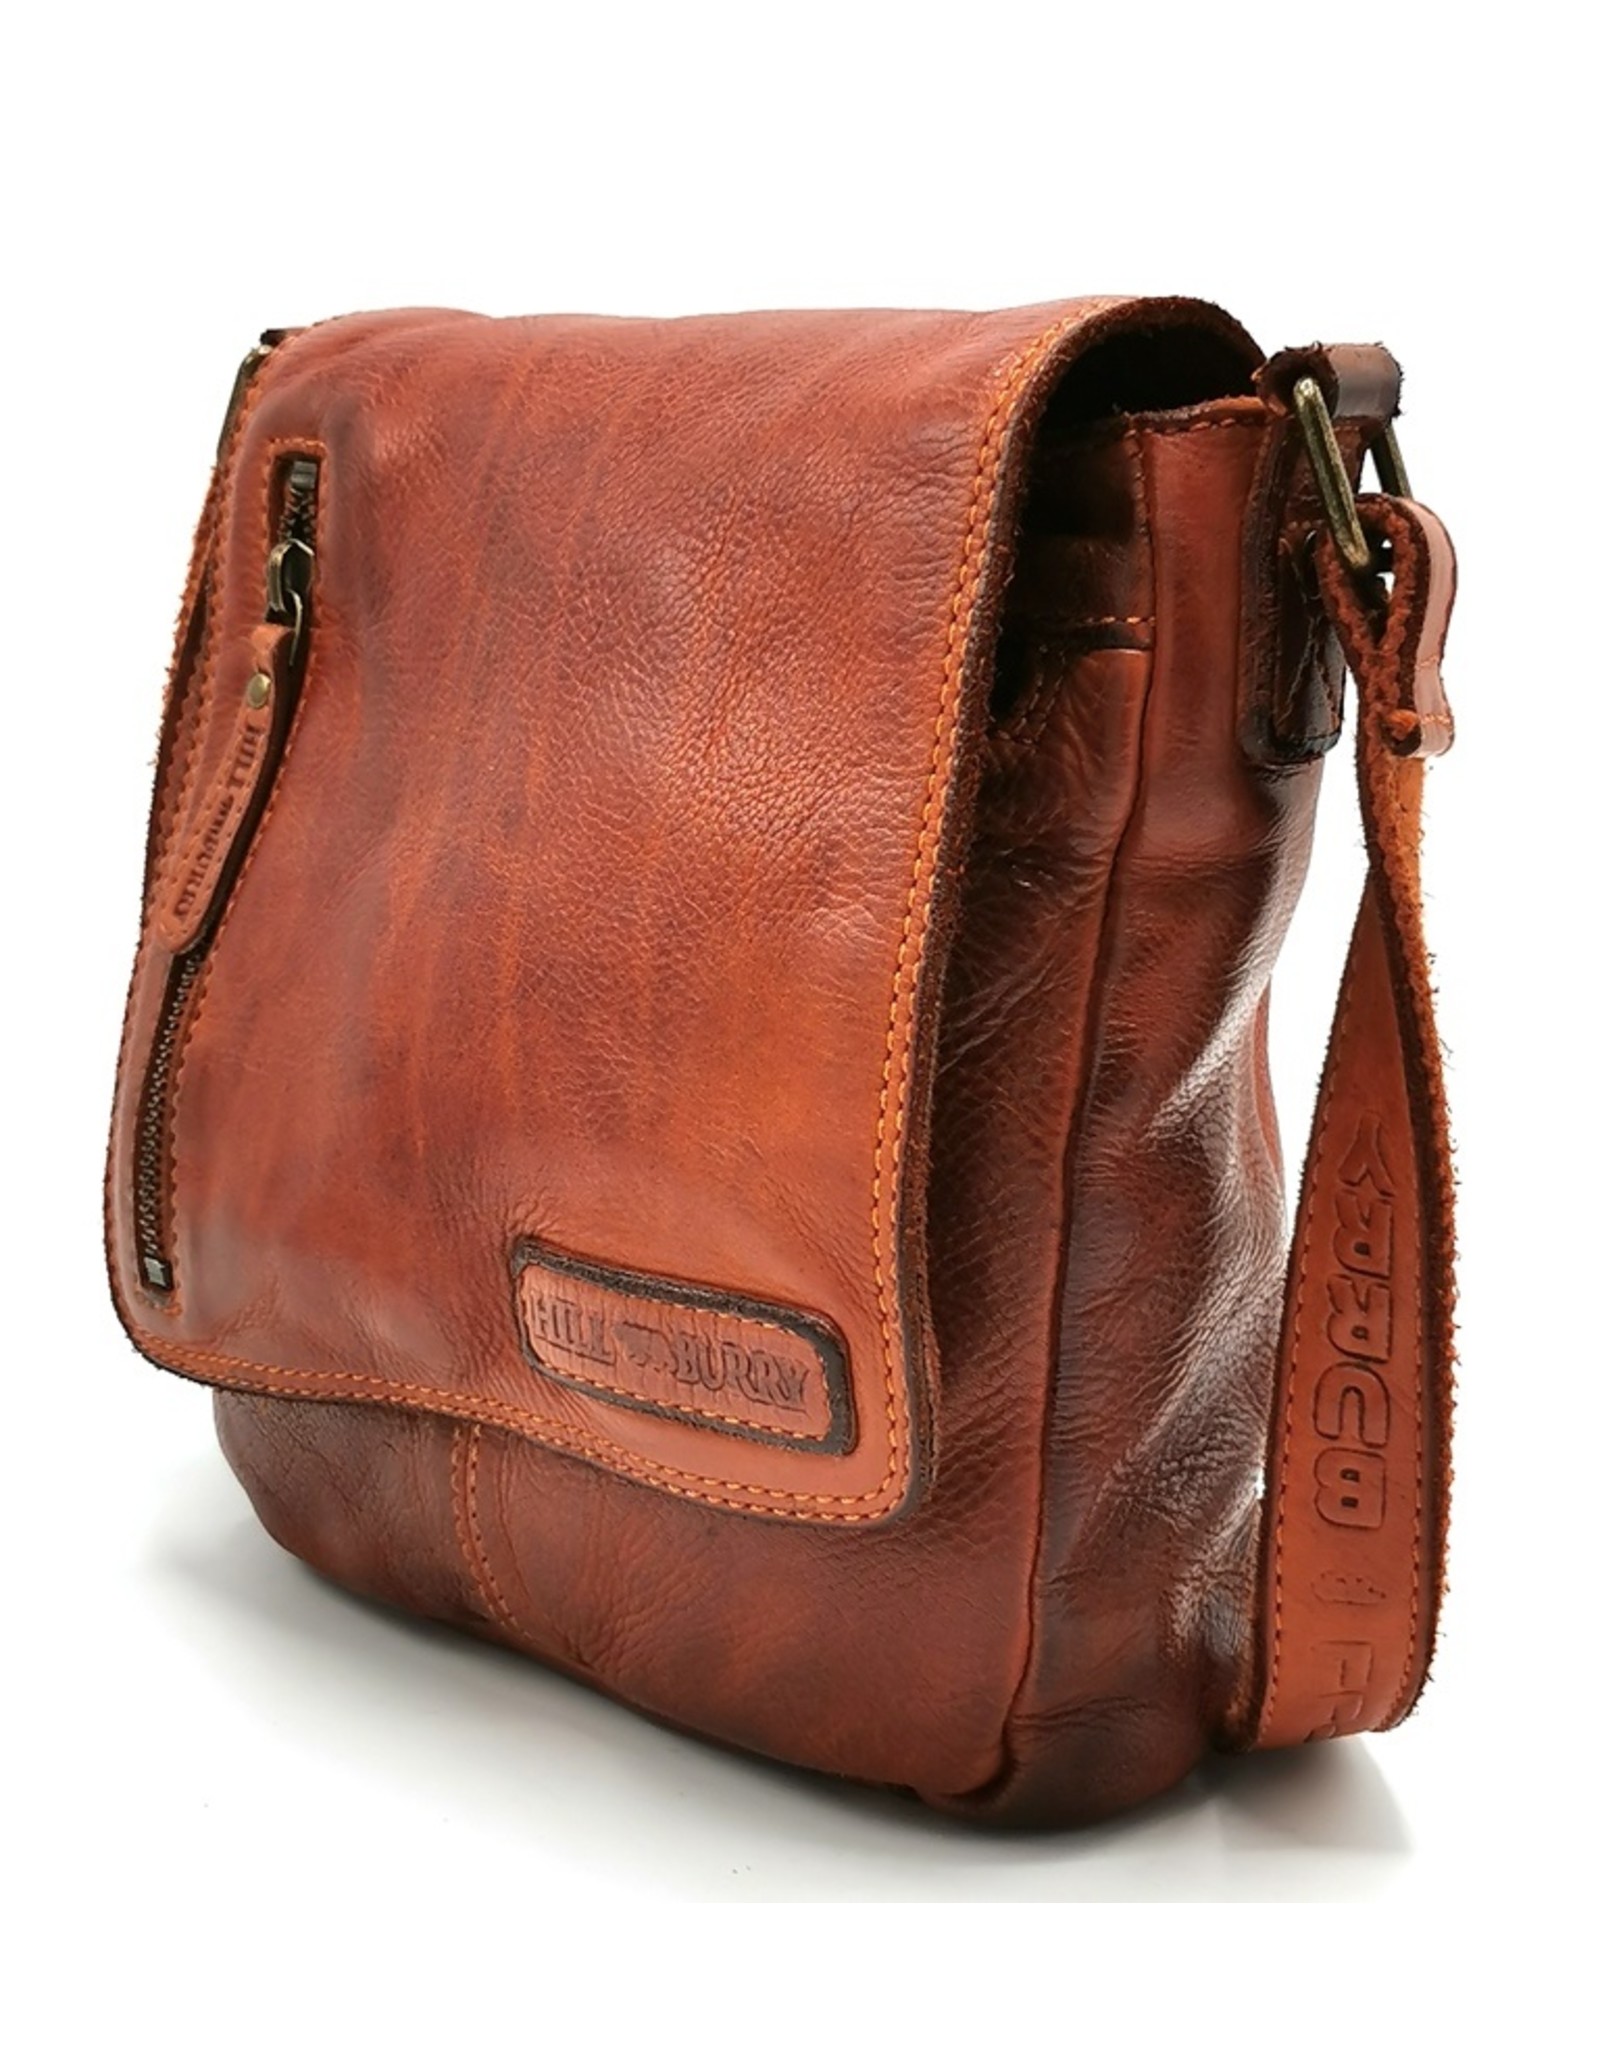 HillBurry Leather bags - HillBurry Shoulder Bag with Cover Washed leather orange